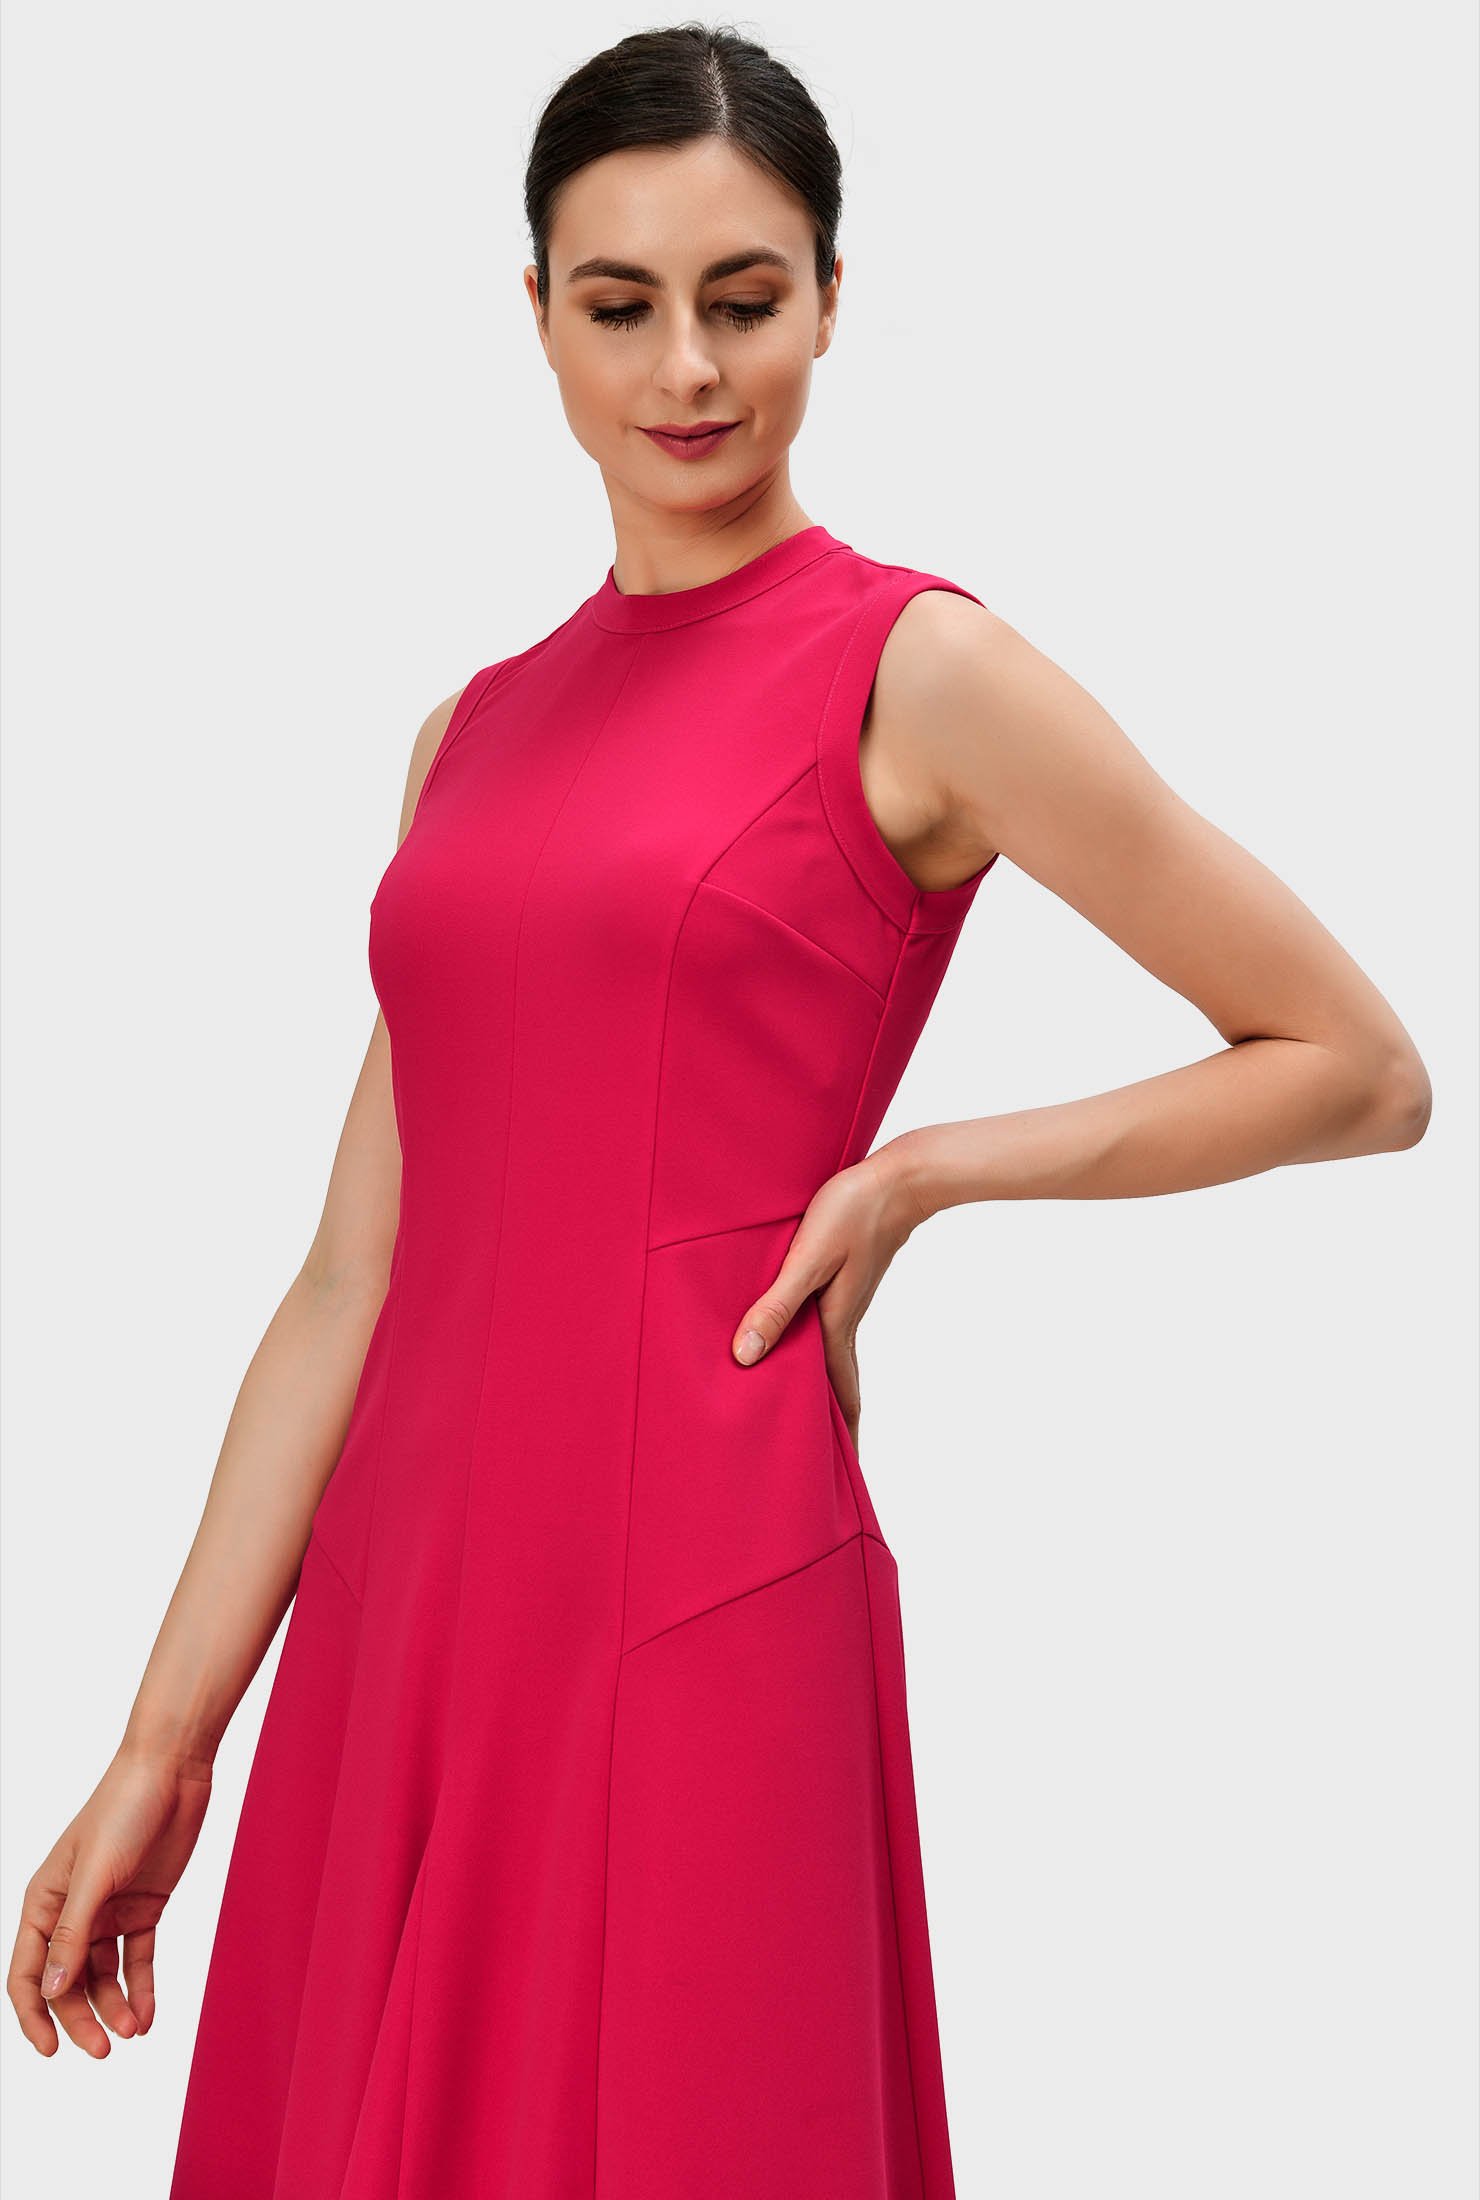 Polished yet relaxed in elegantly fluid jersey, our shaped crepe knit dress in flattering seamed and segmented panels is cinched in at the side with an asymmetric seamed waist.